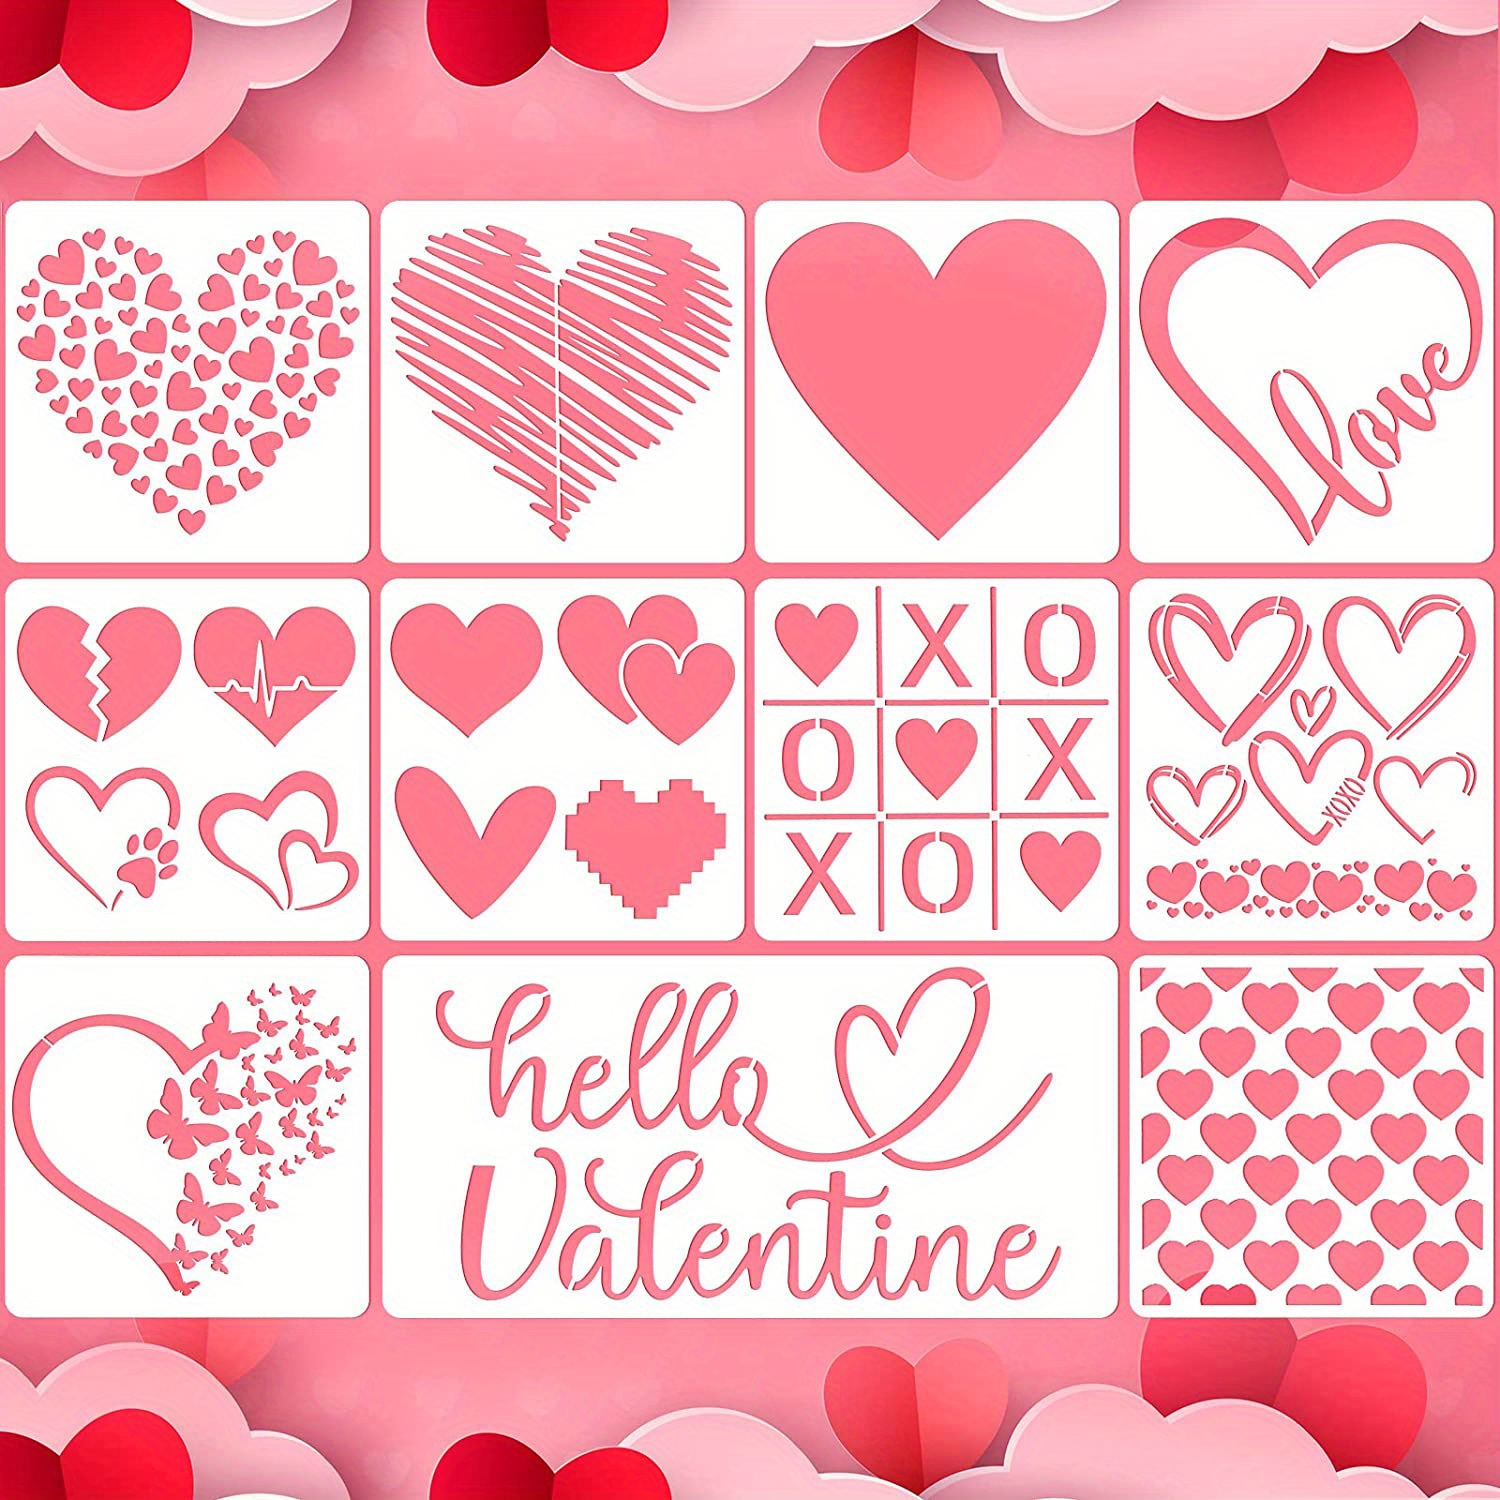 16 Pieces Valentine's Day Stencils Love Heart Templates Stencils Reusable  Kiss Me XOXO Stencil Template Envelope Stencils for DIY Painting on Wood